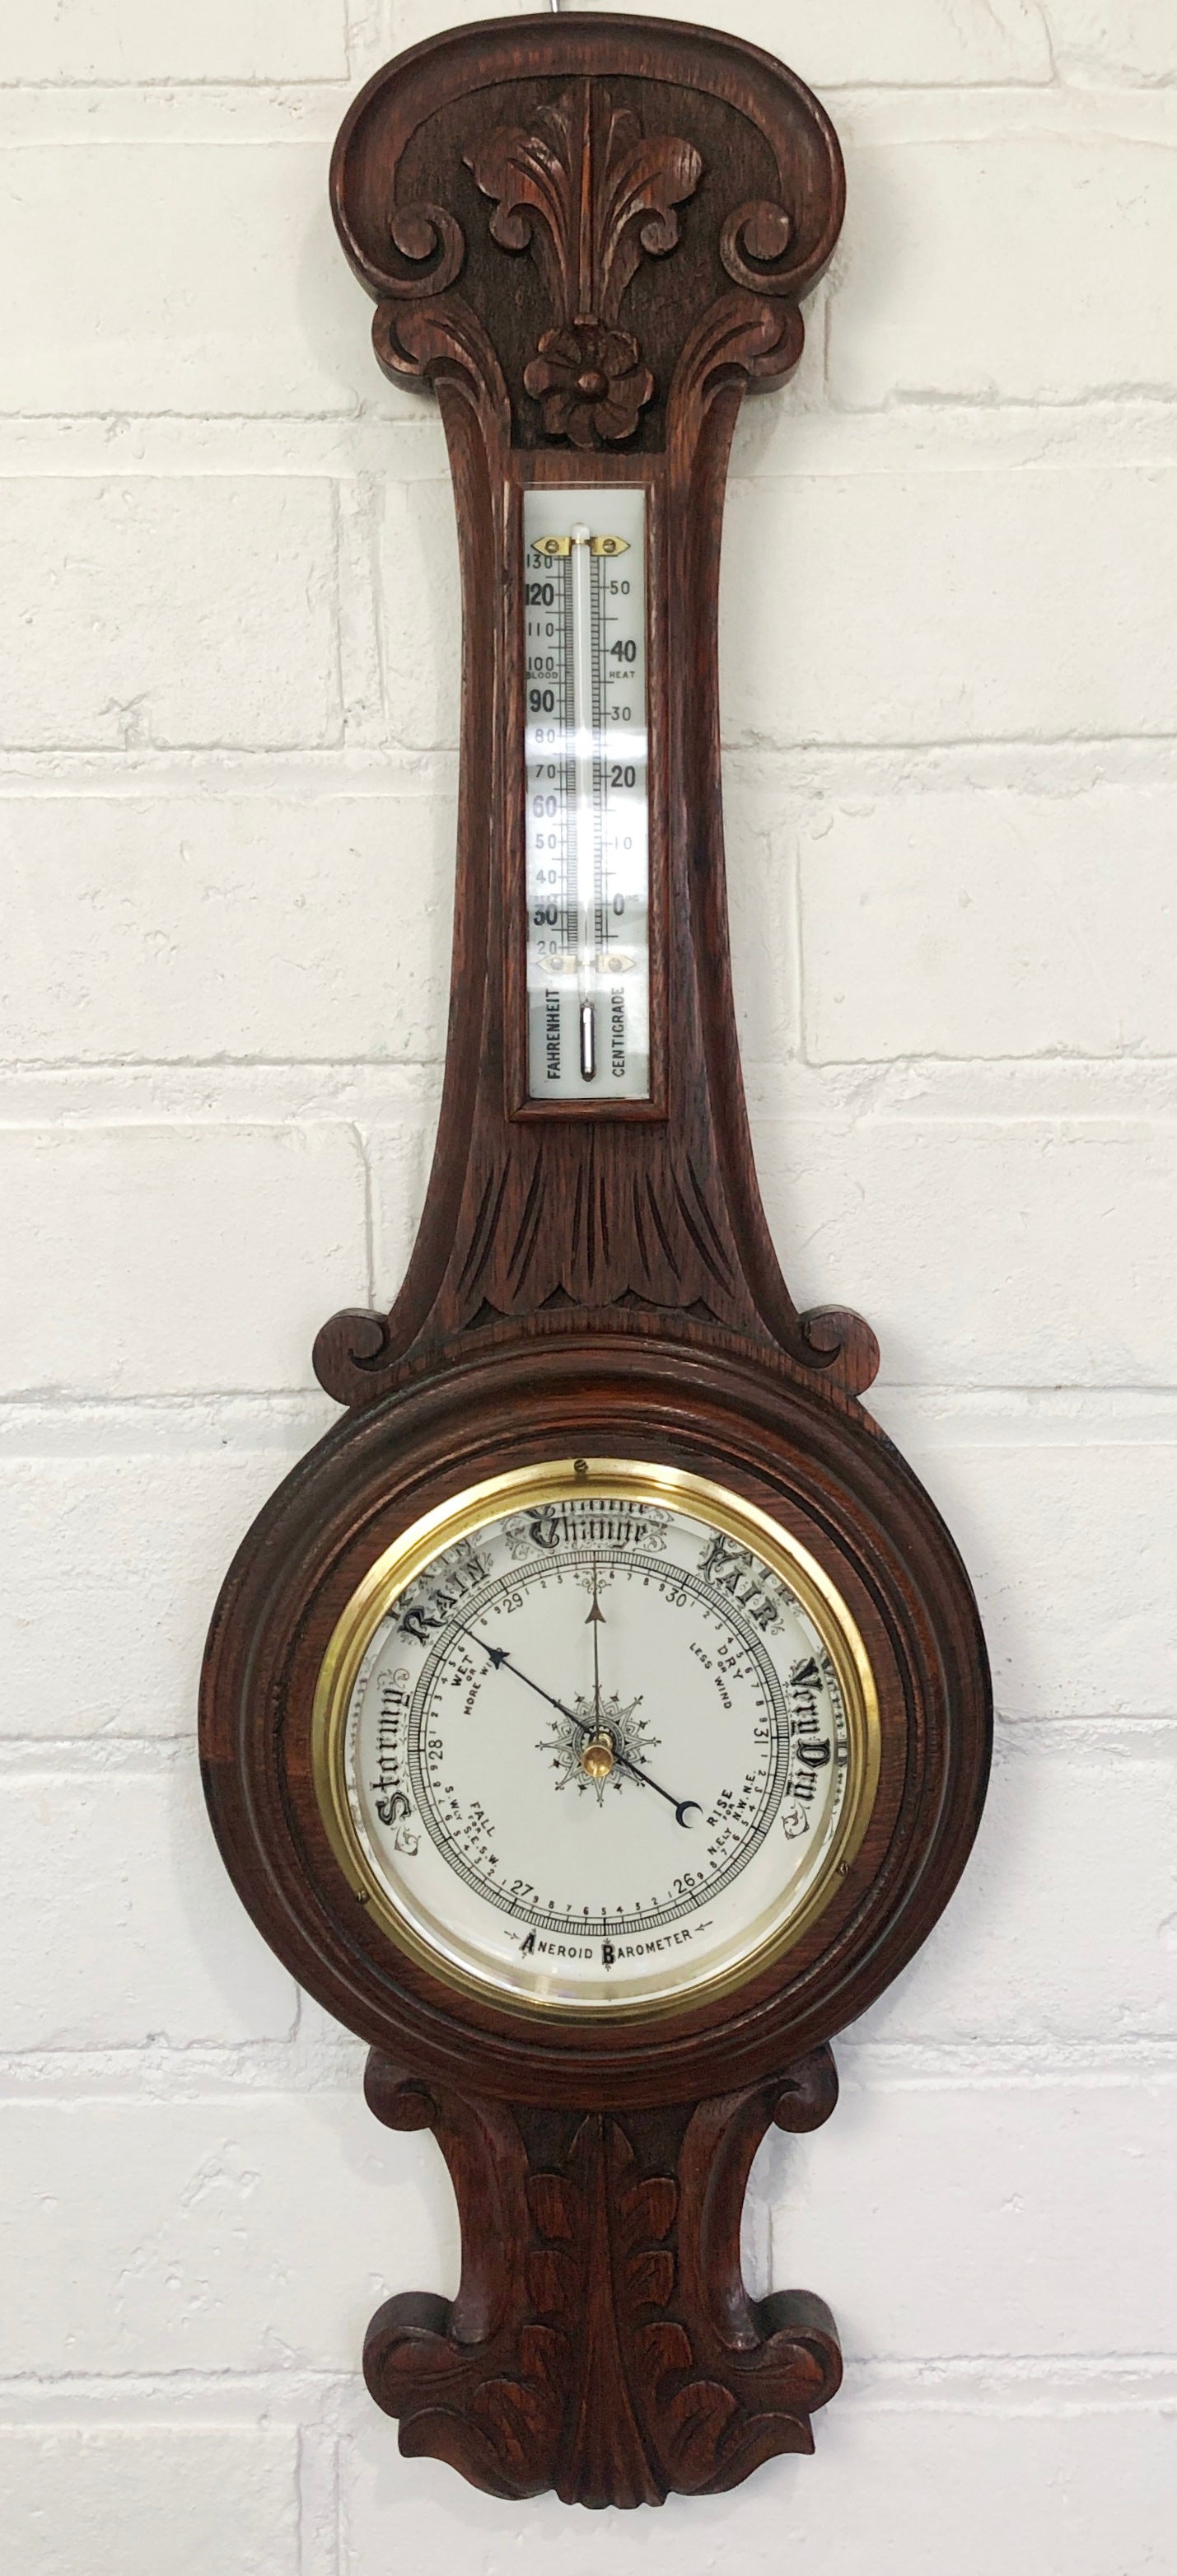 Original Vintage Wall Barometer & Thermometer | eXibit collection